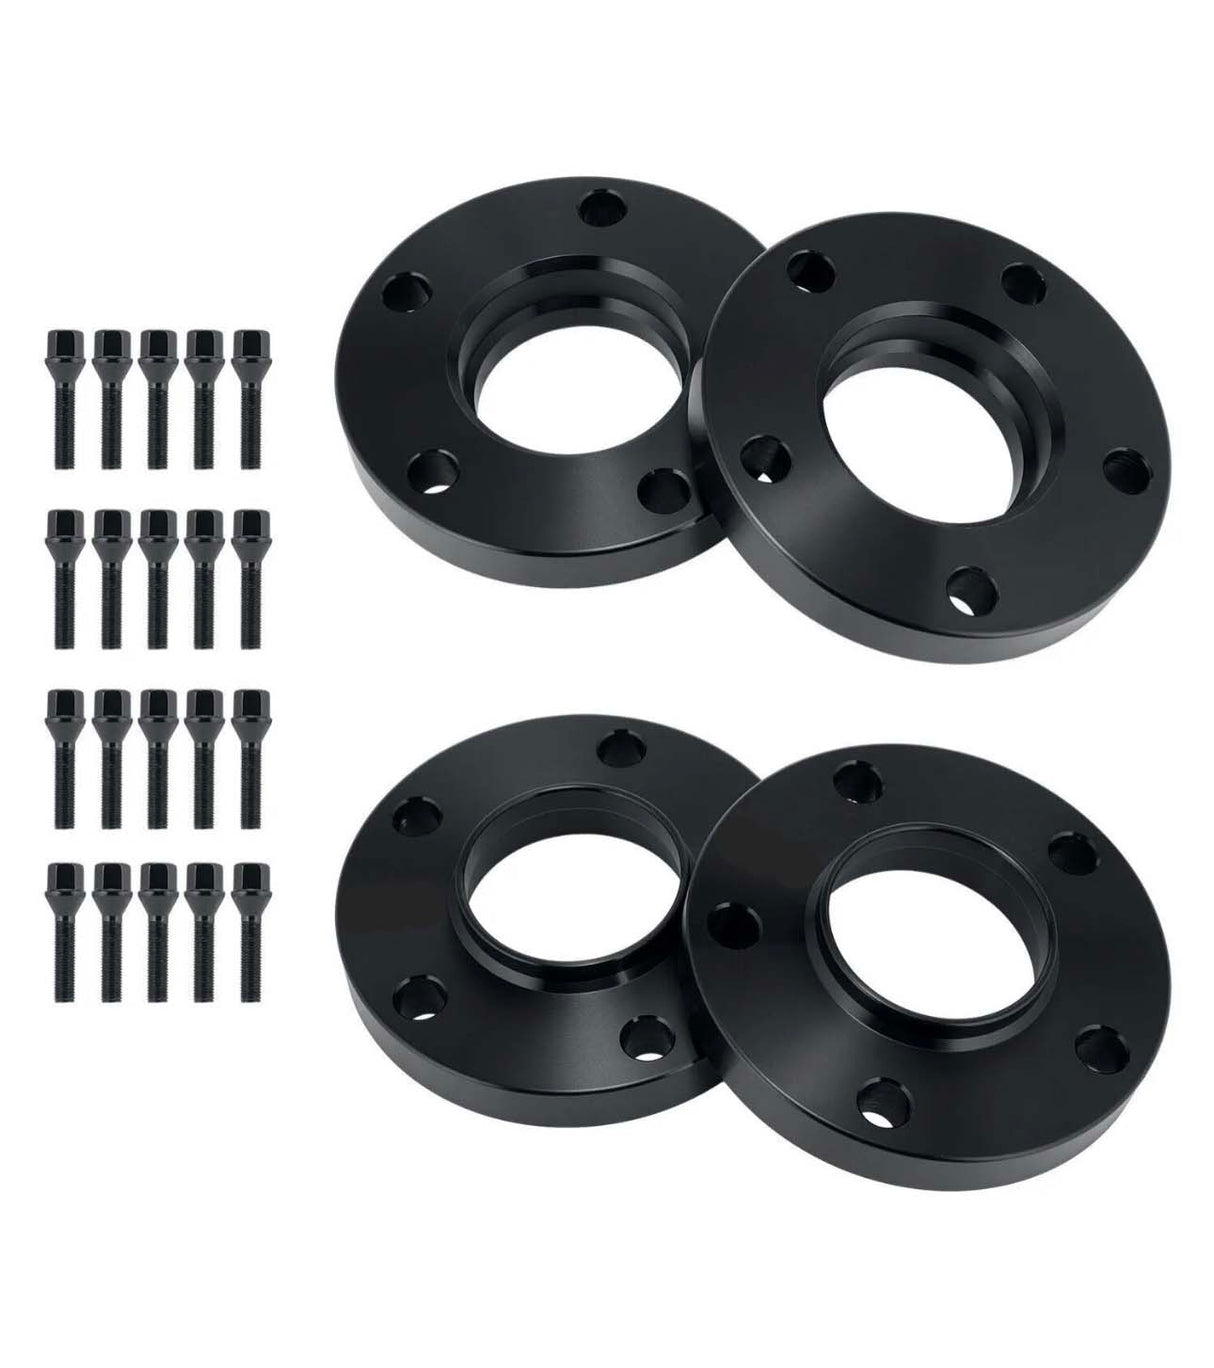 1 Series - F20/F21: Black Alloy Wheel Spacers & Bolts 11-19